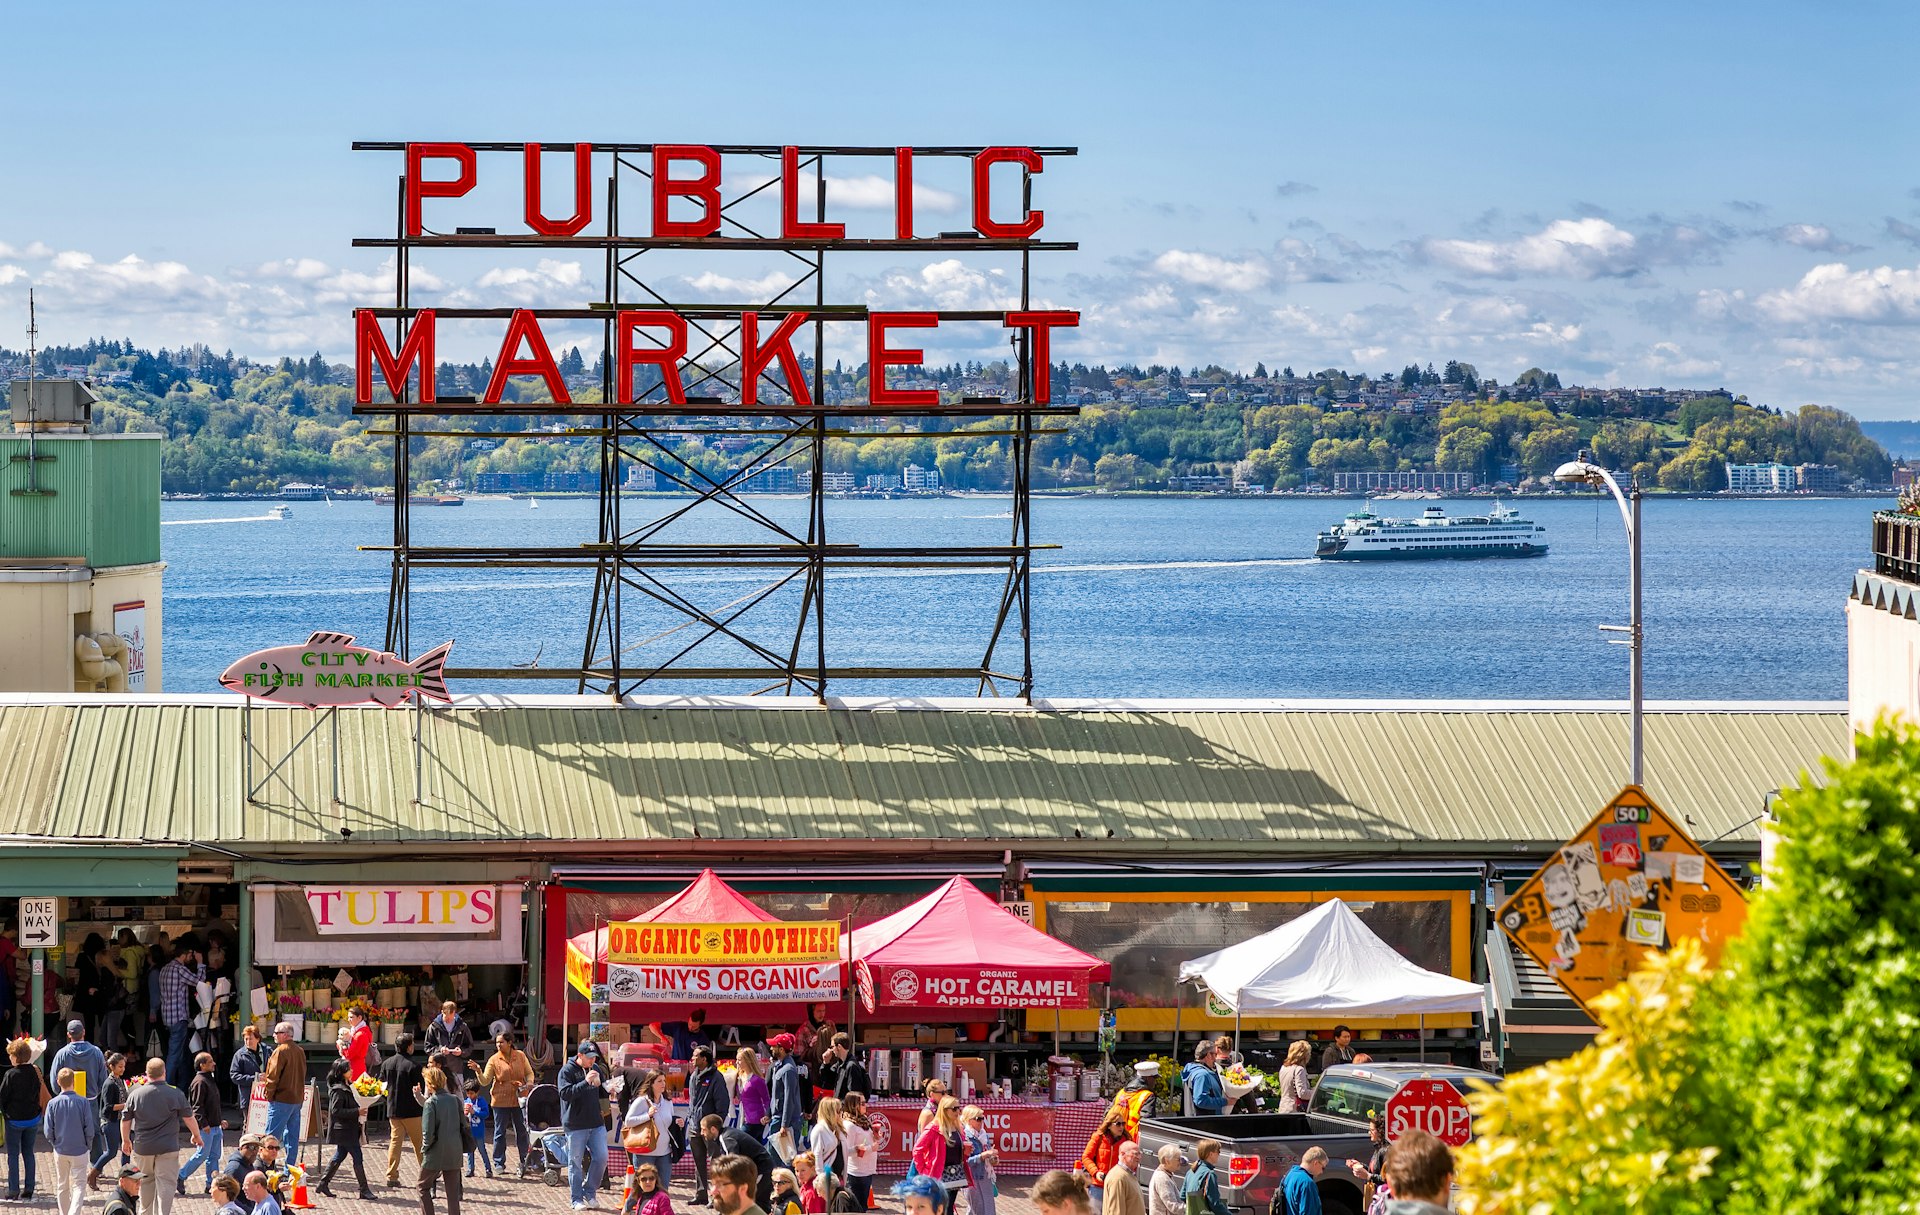 People shopping at Pike Place Market in Seattle, Washington